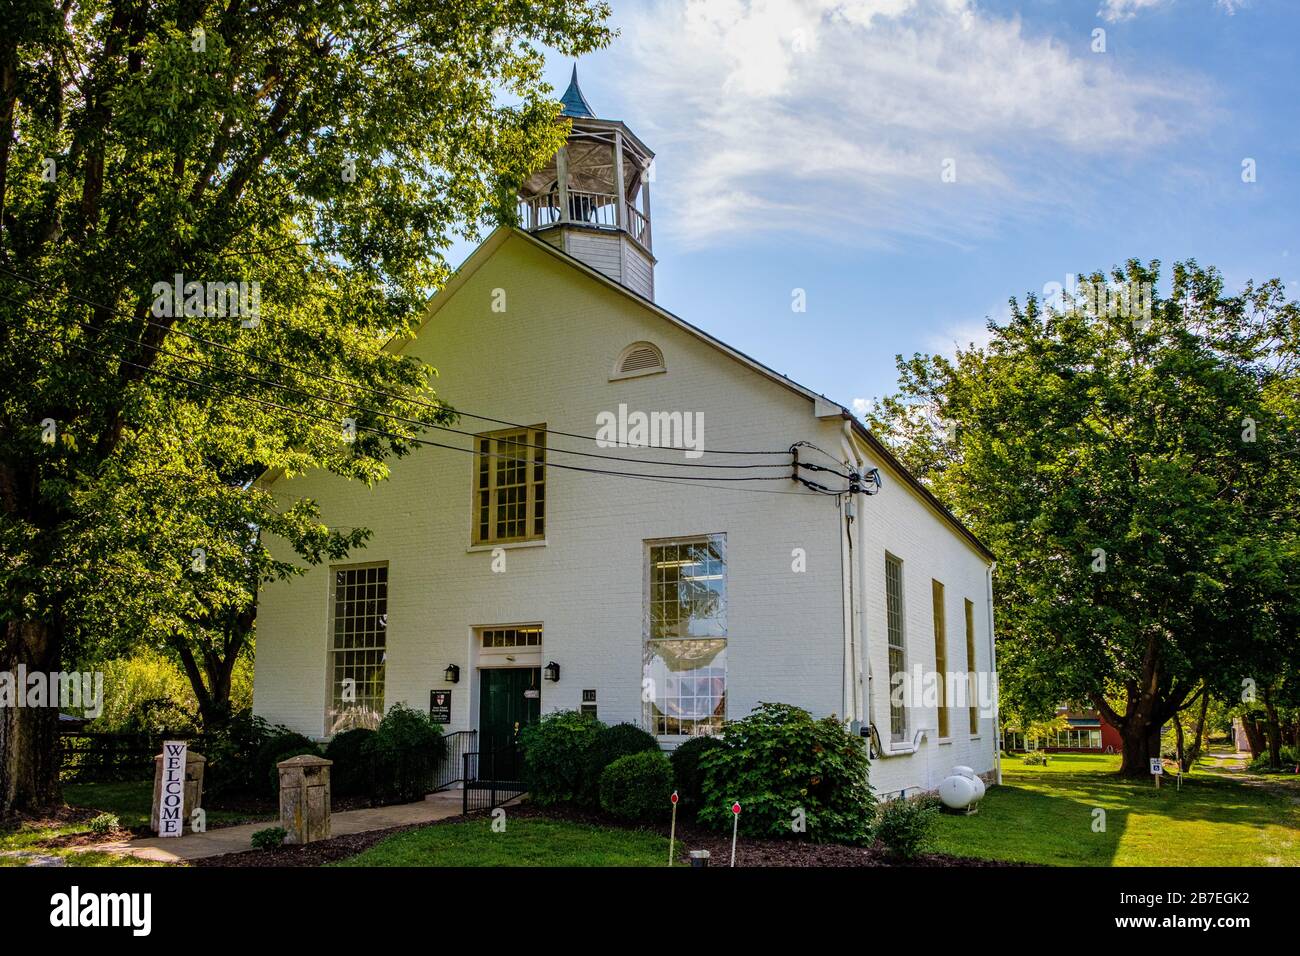 The White Church, 112 East Street, Middleway, West Virginia Stock Photo